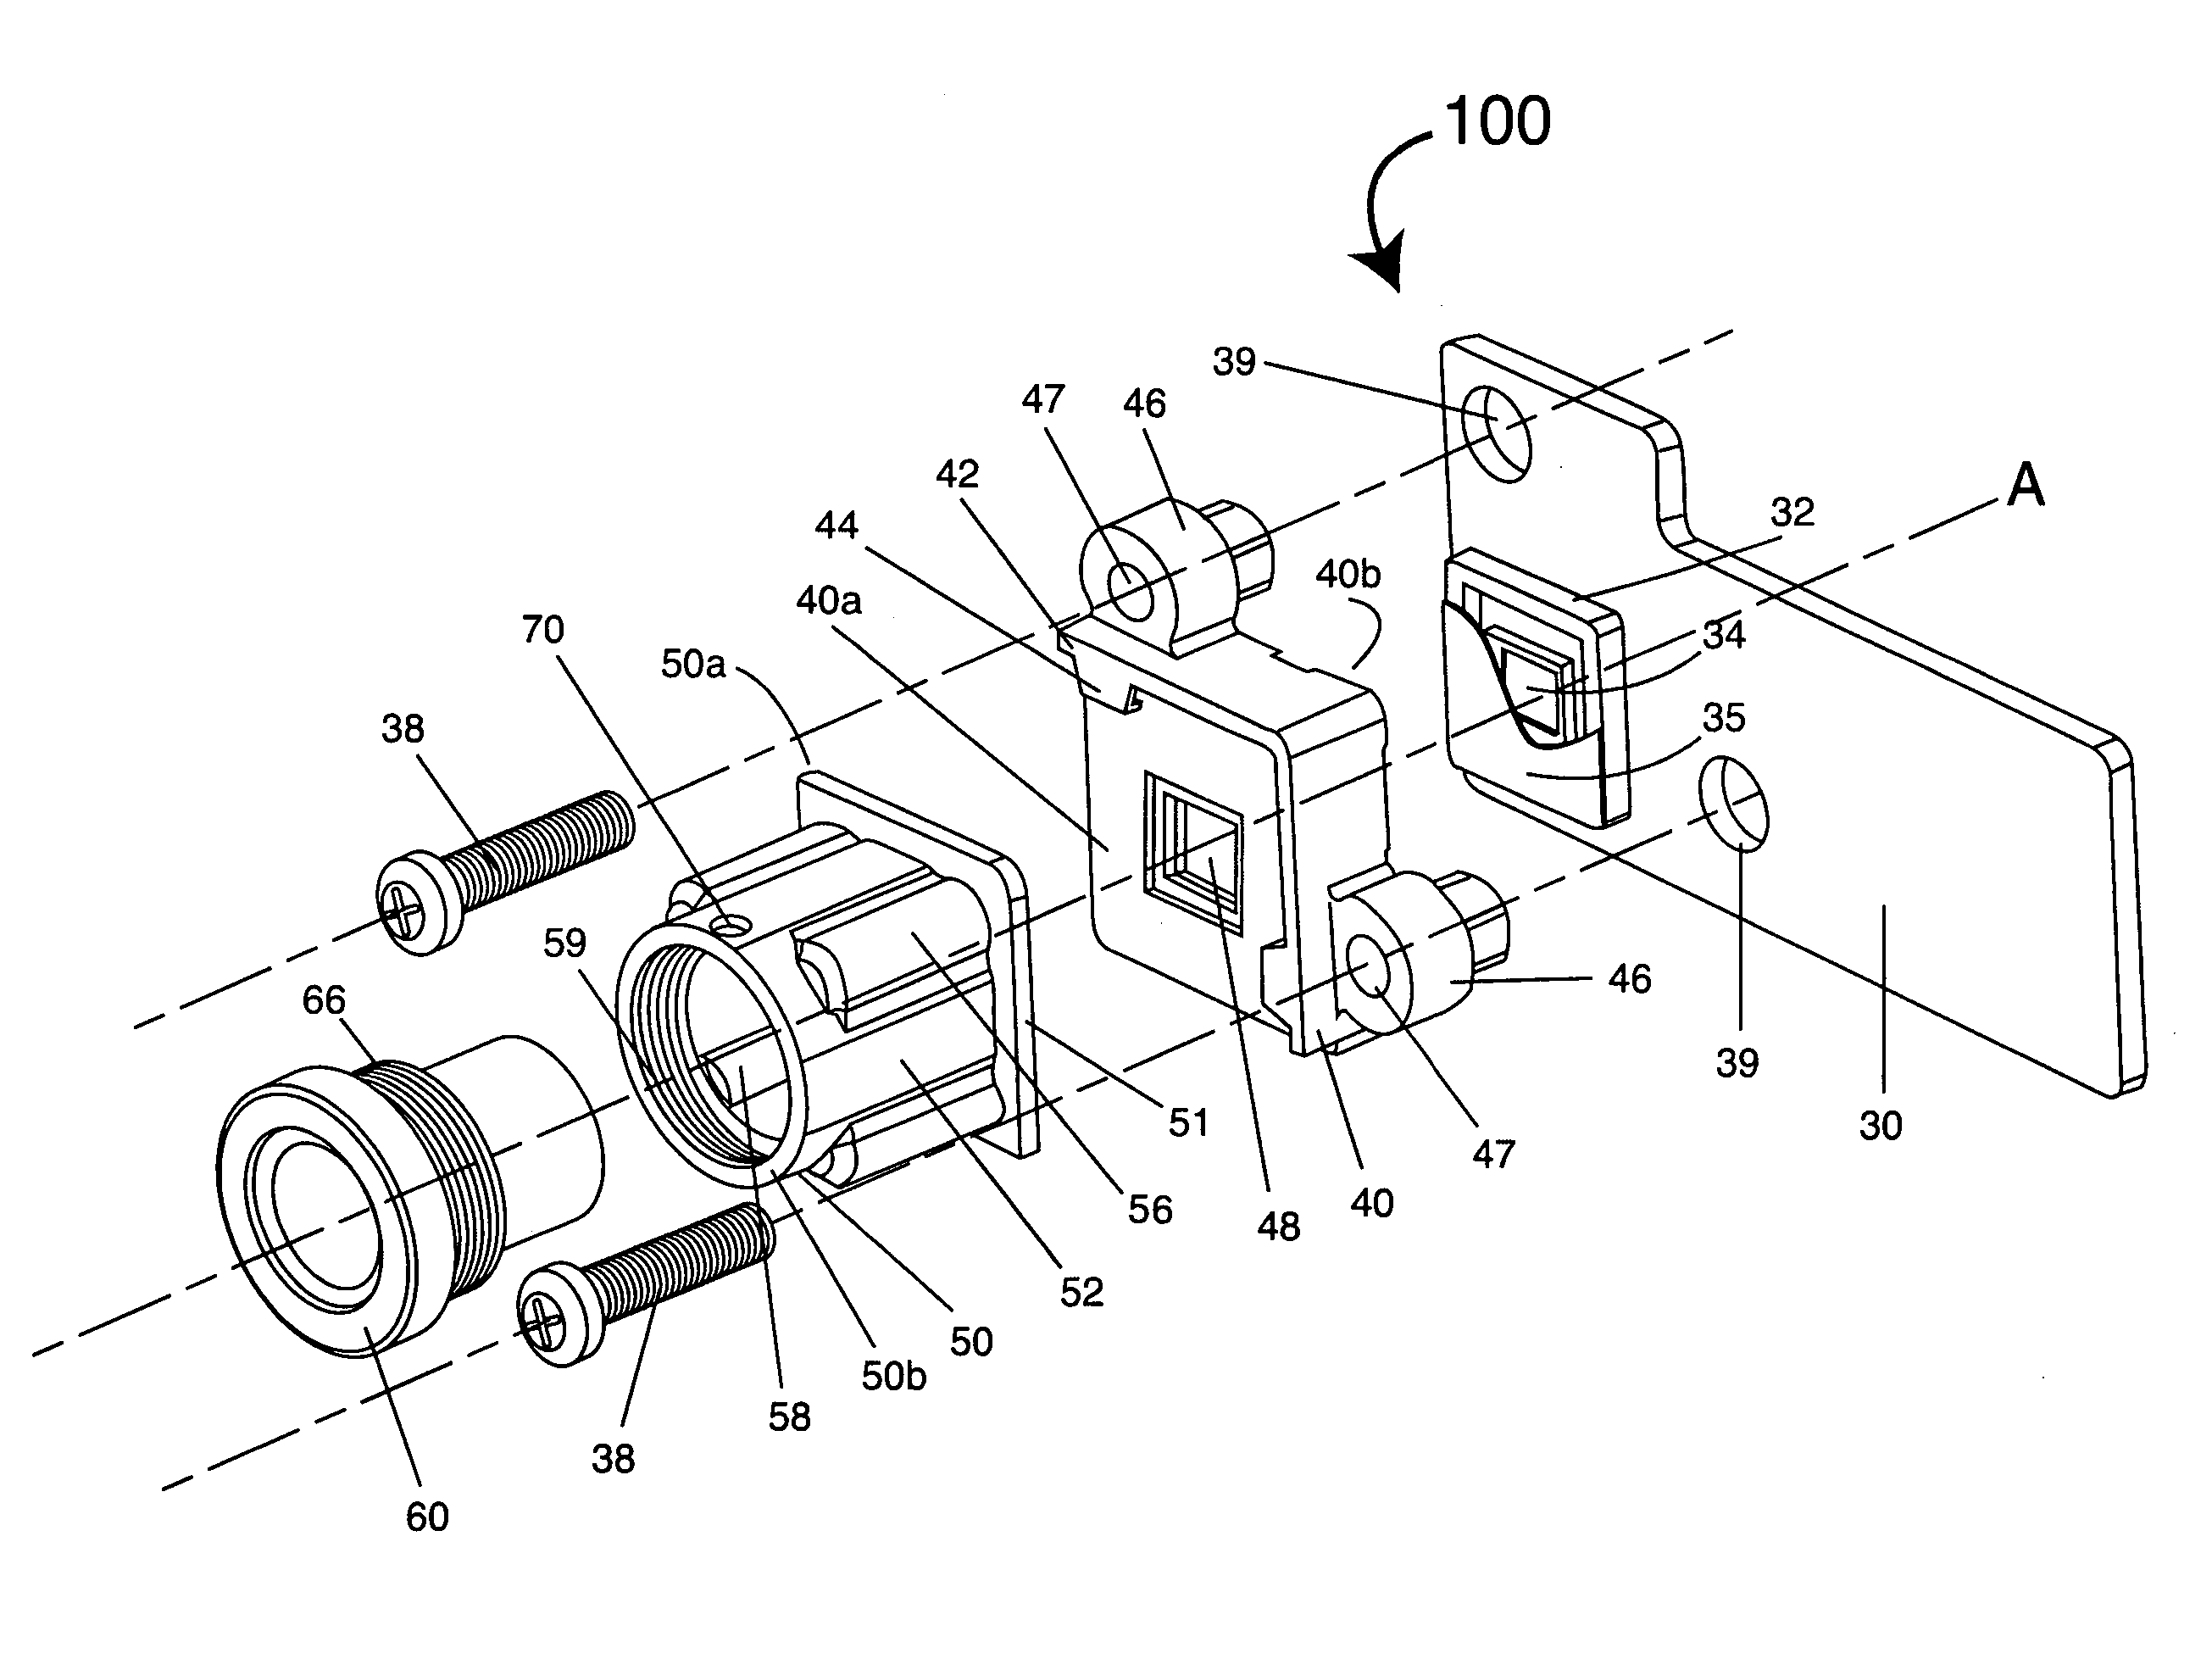 Self-adjusting lens mount for automated assembly of vehicle sensors